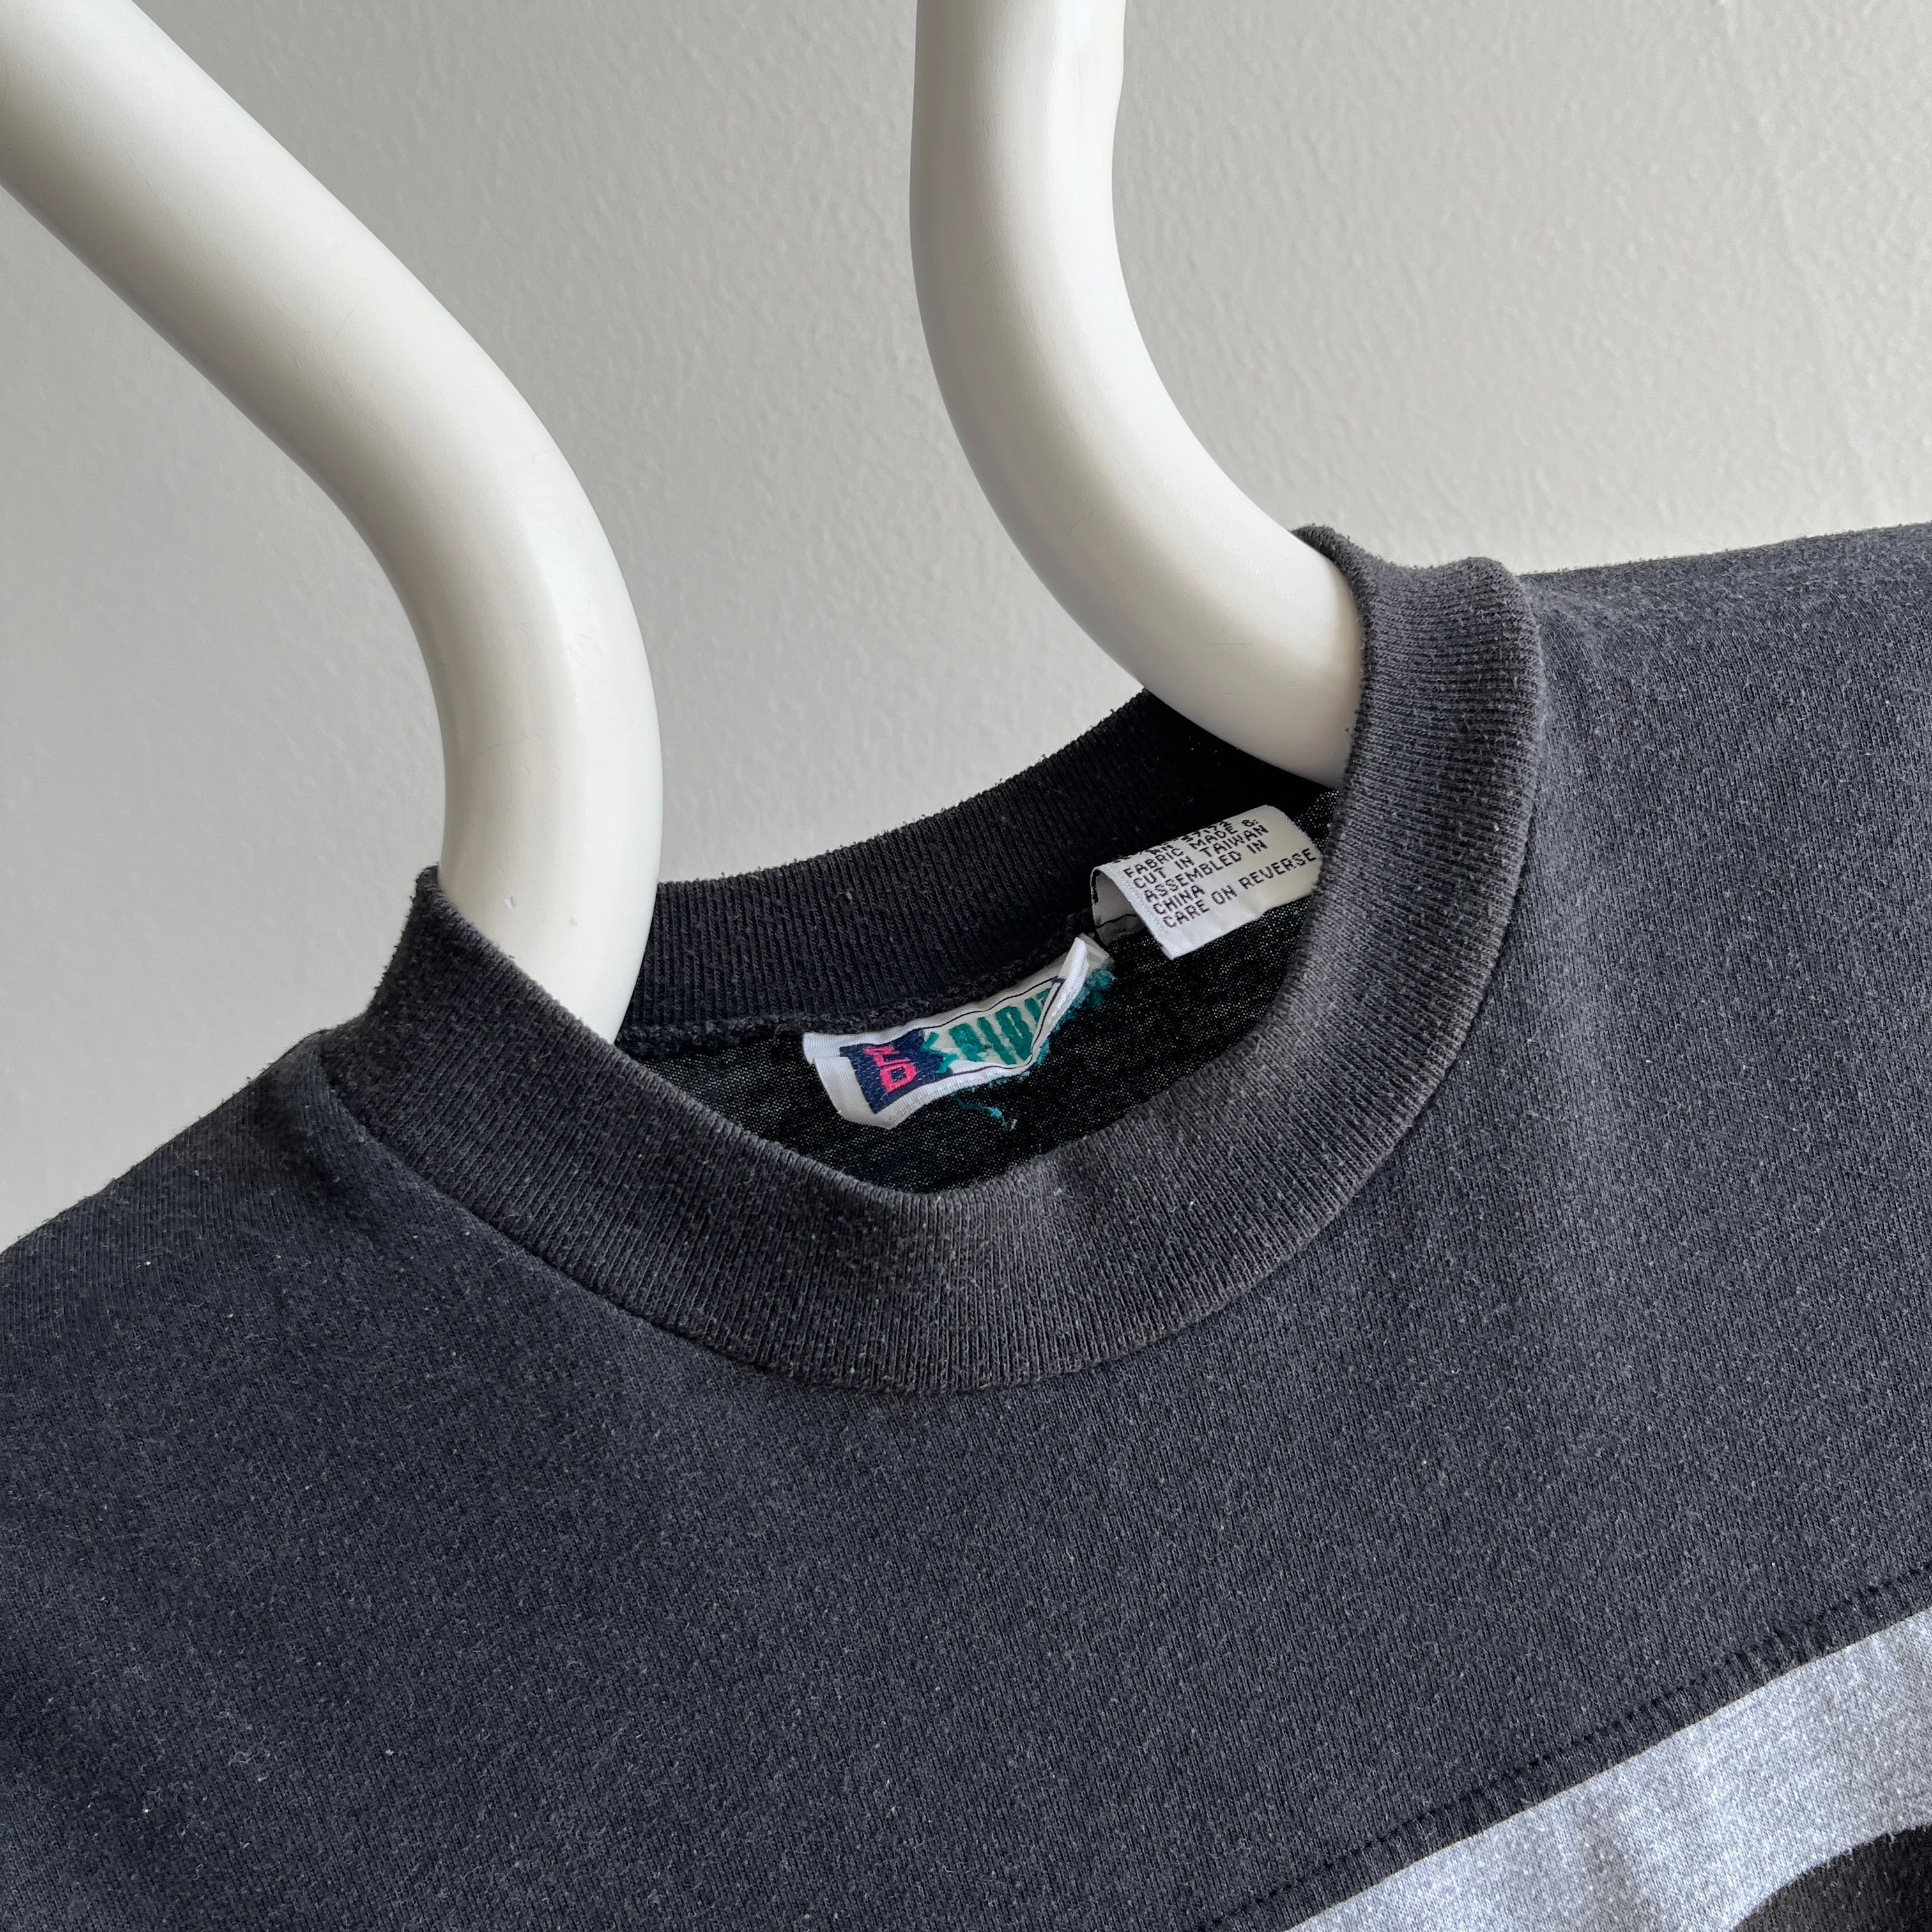 1980s Striped and Color Blocked T-Shirt